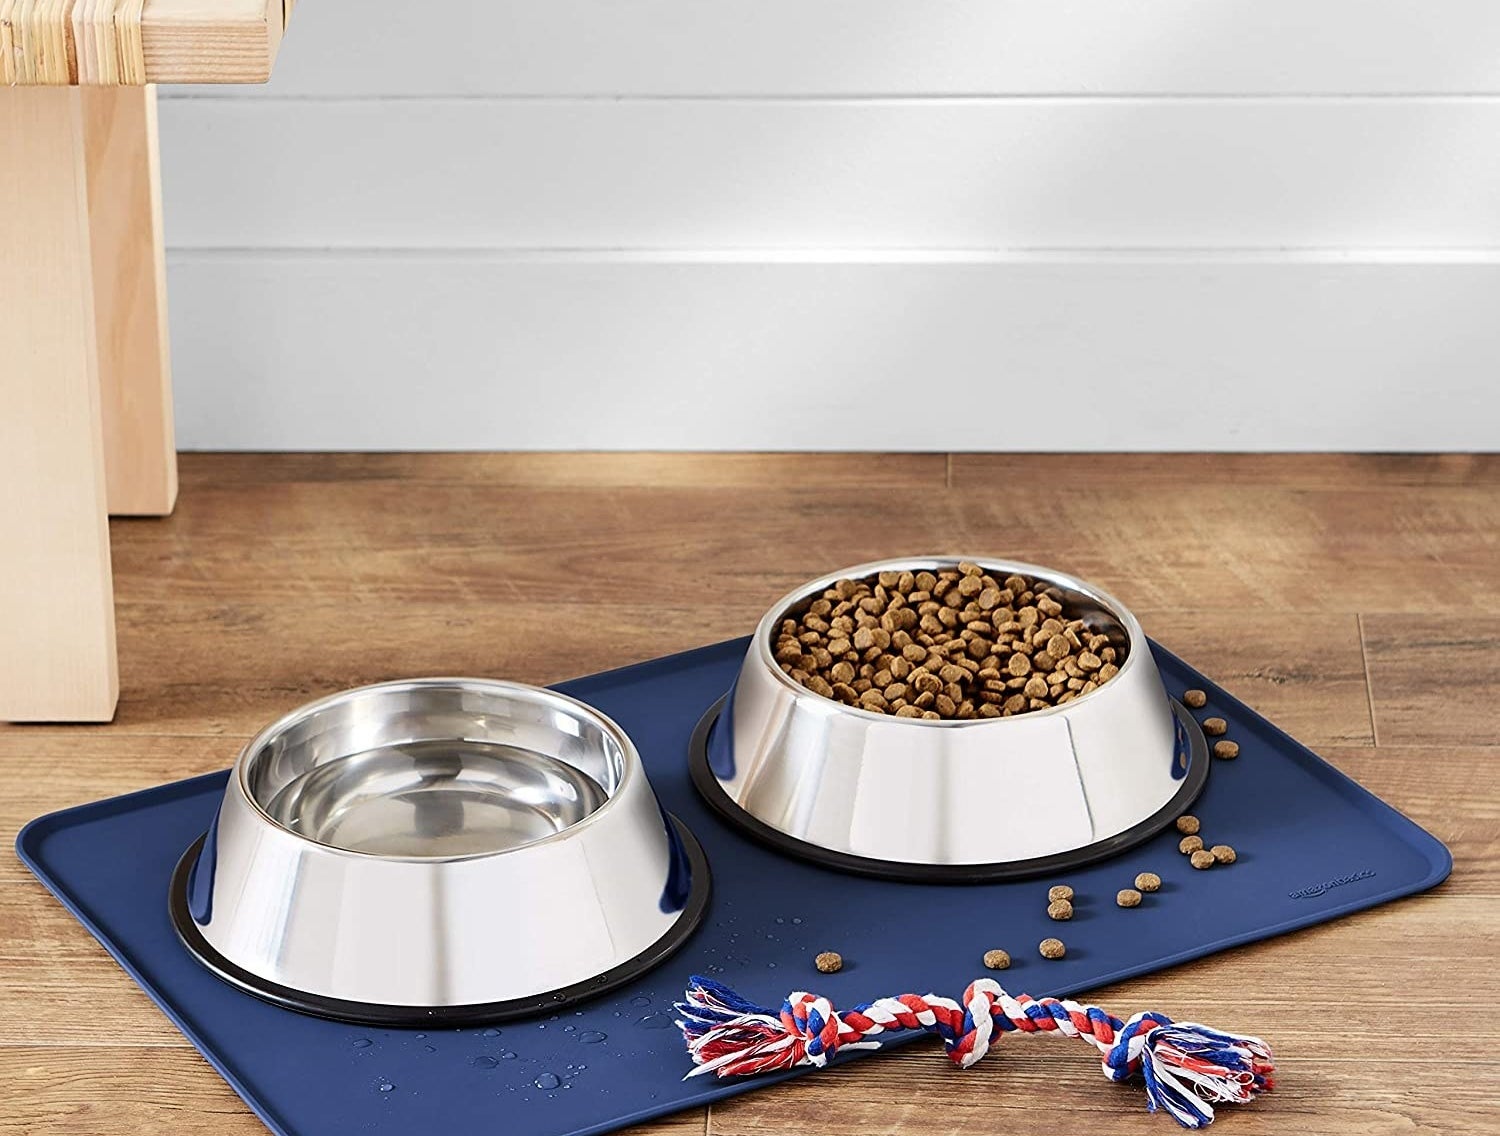 a silicone food mat under two dog bowls filled with kibble and water